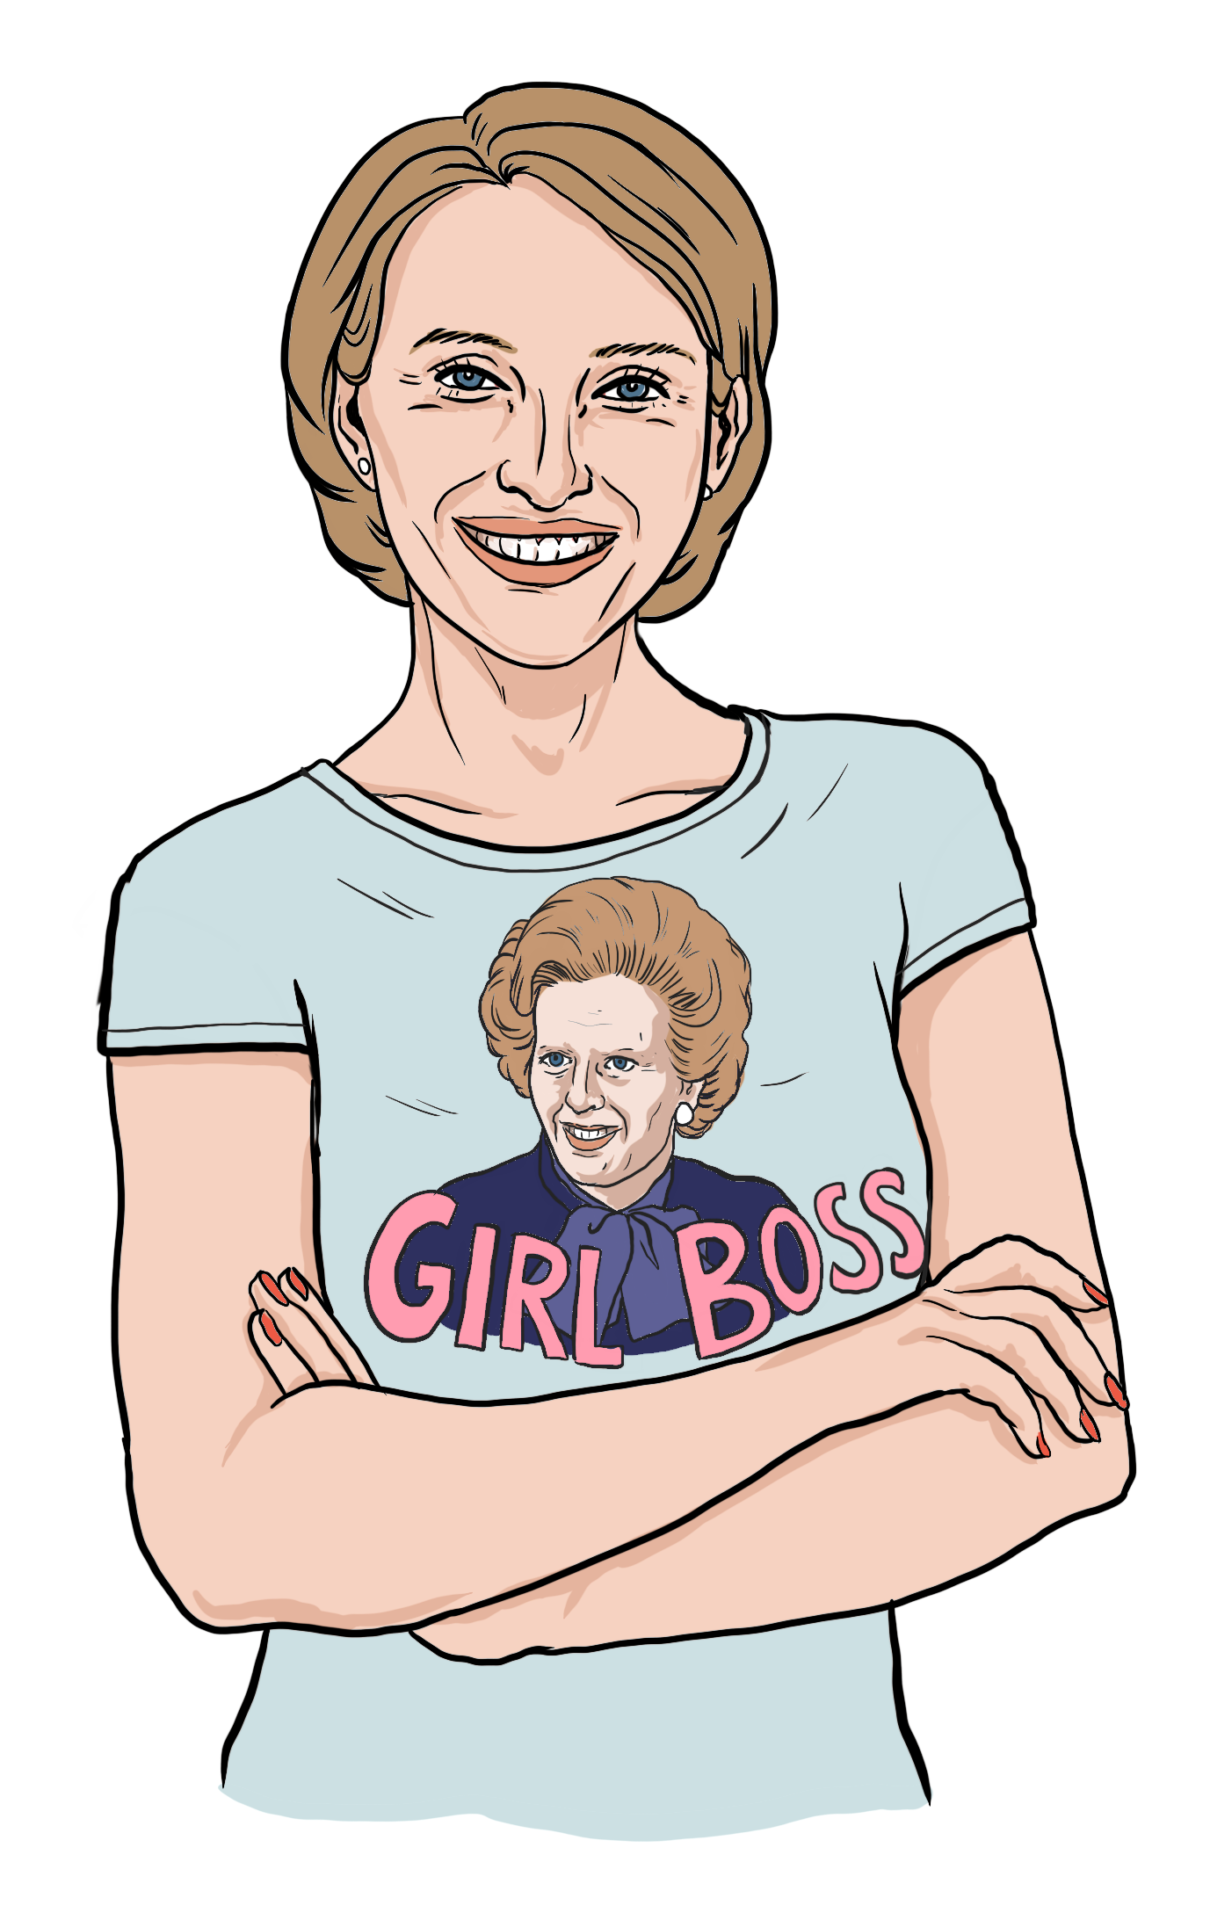 White woman wearing a Margret Thatcher "Girl Boss" shirt smiles proudly